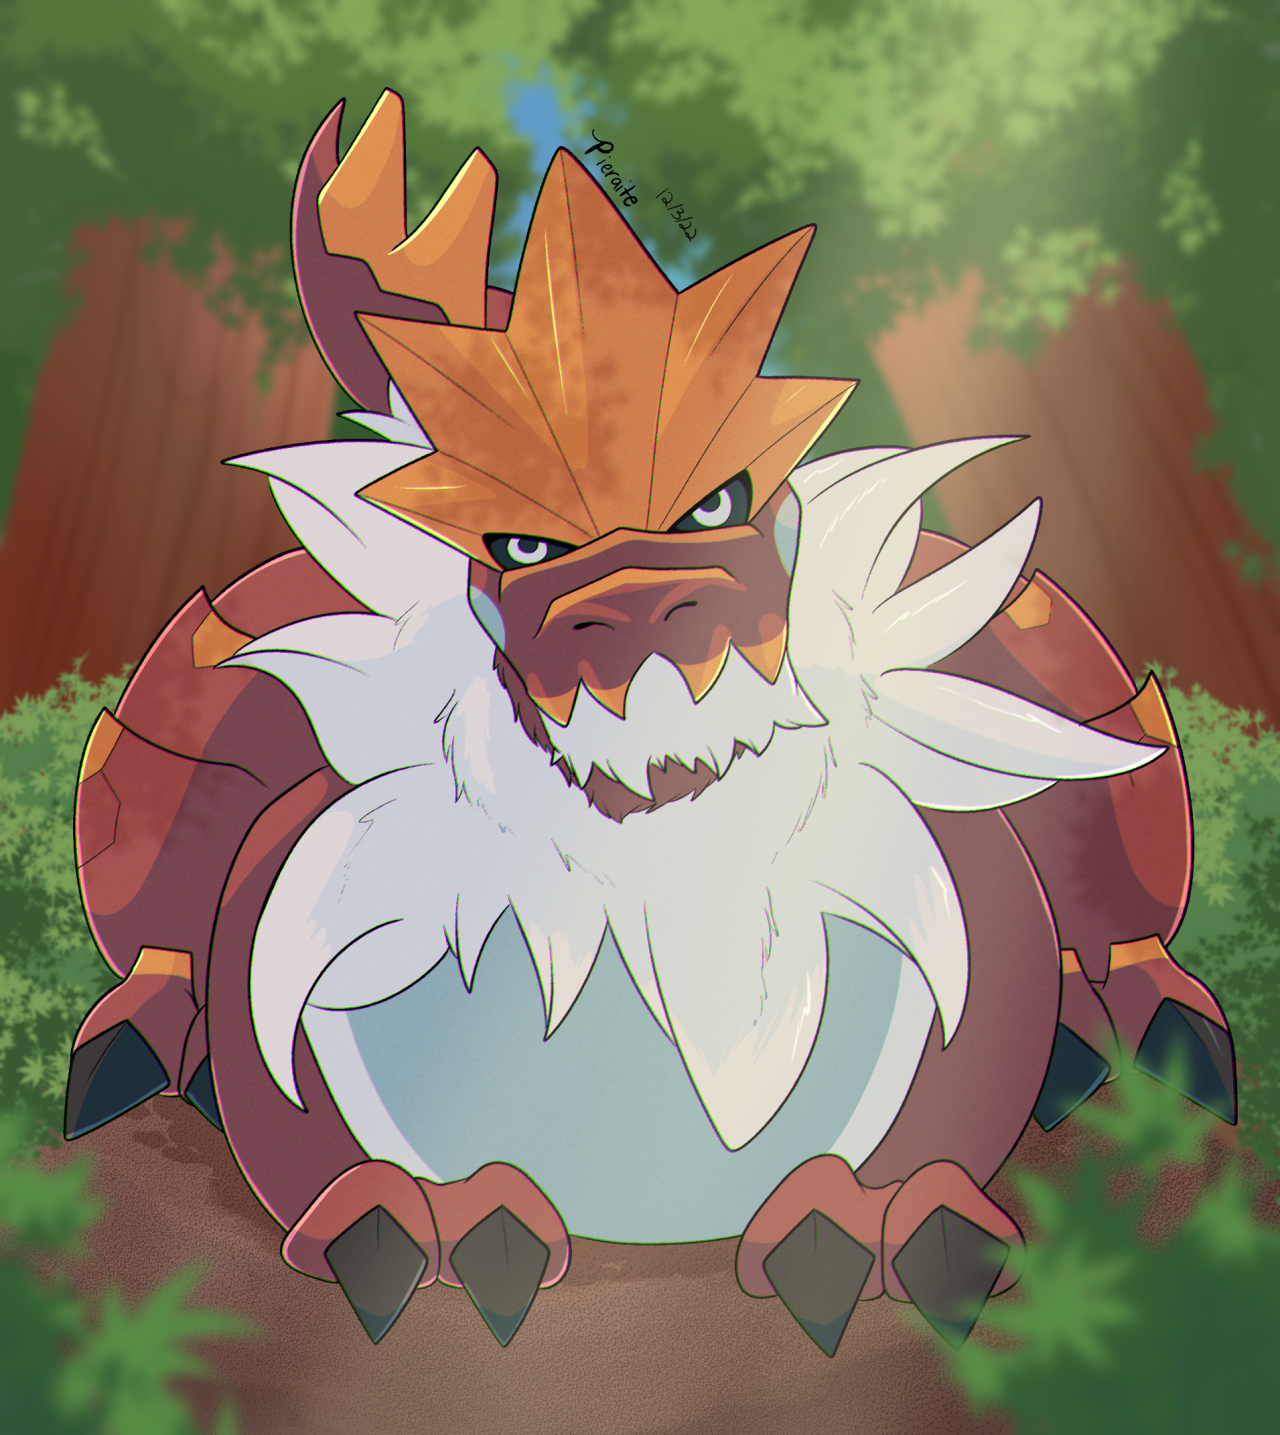 A Tyrantrum in the forest